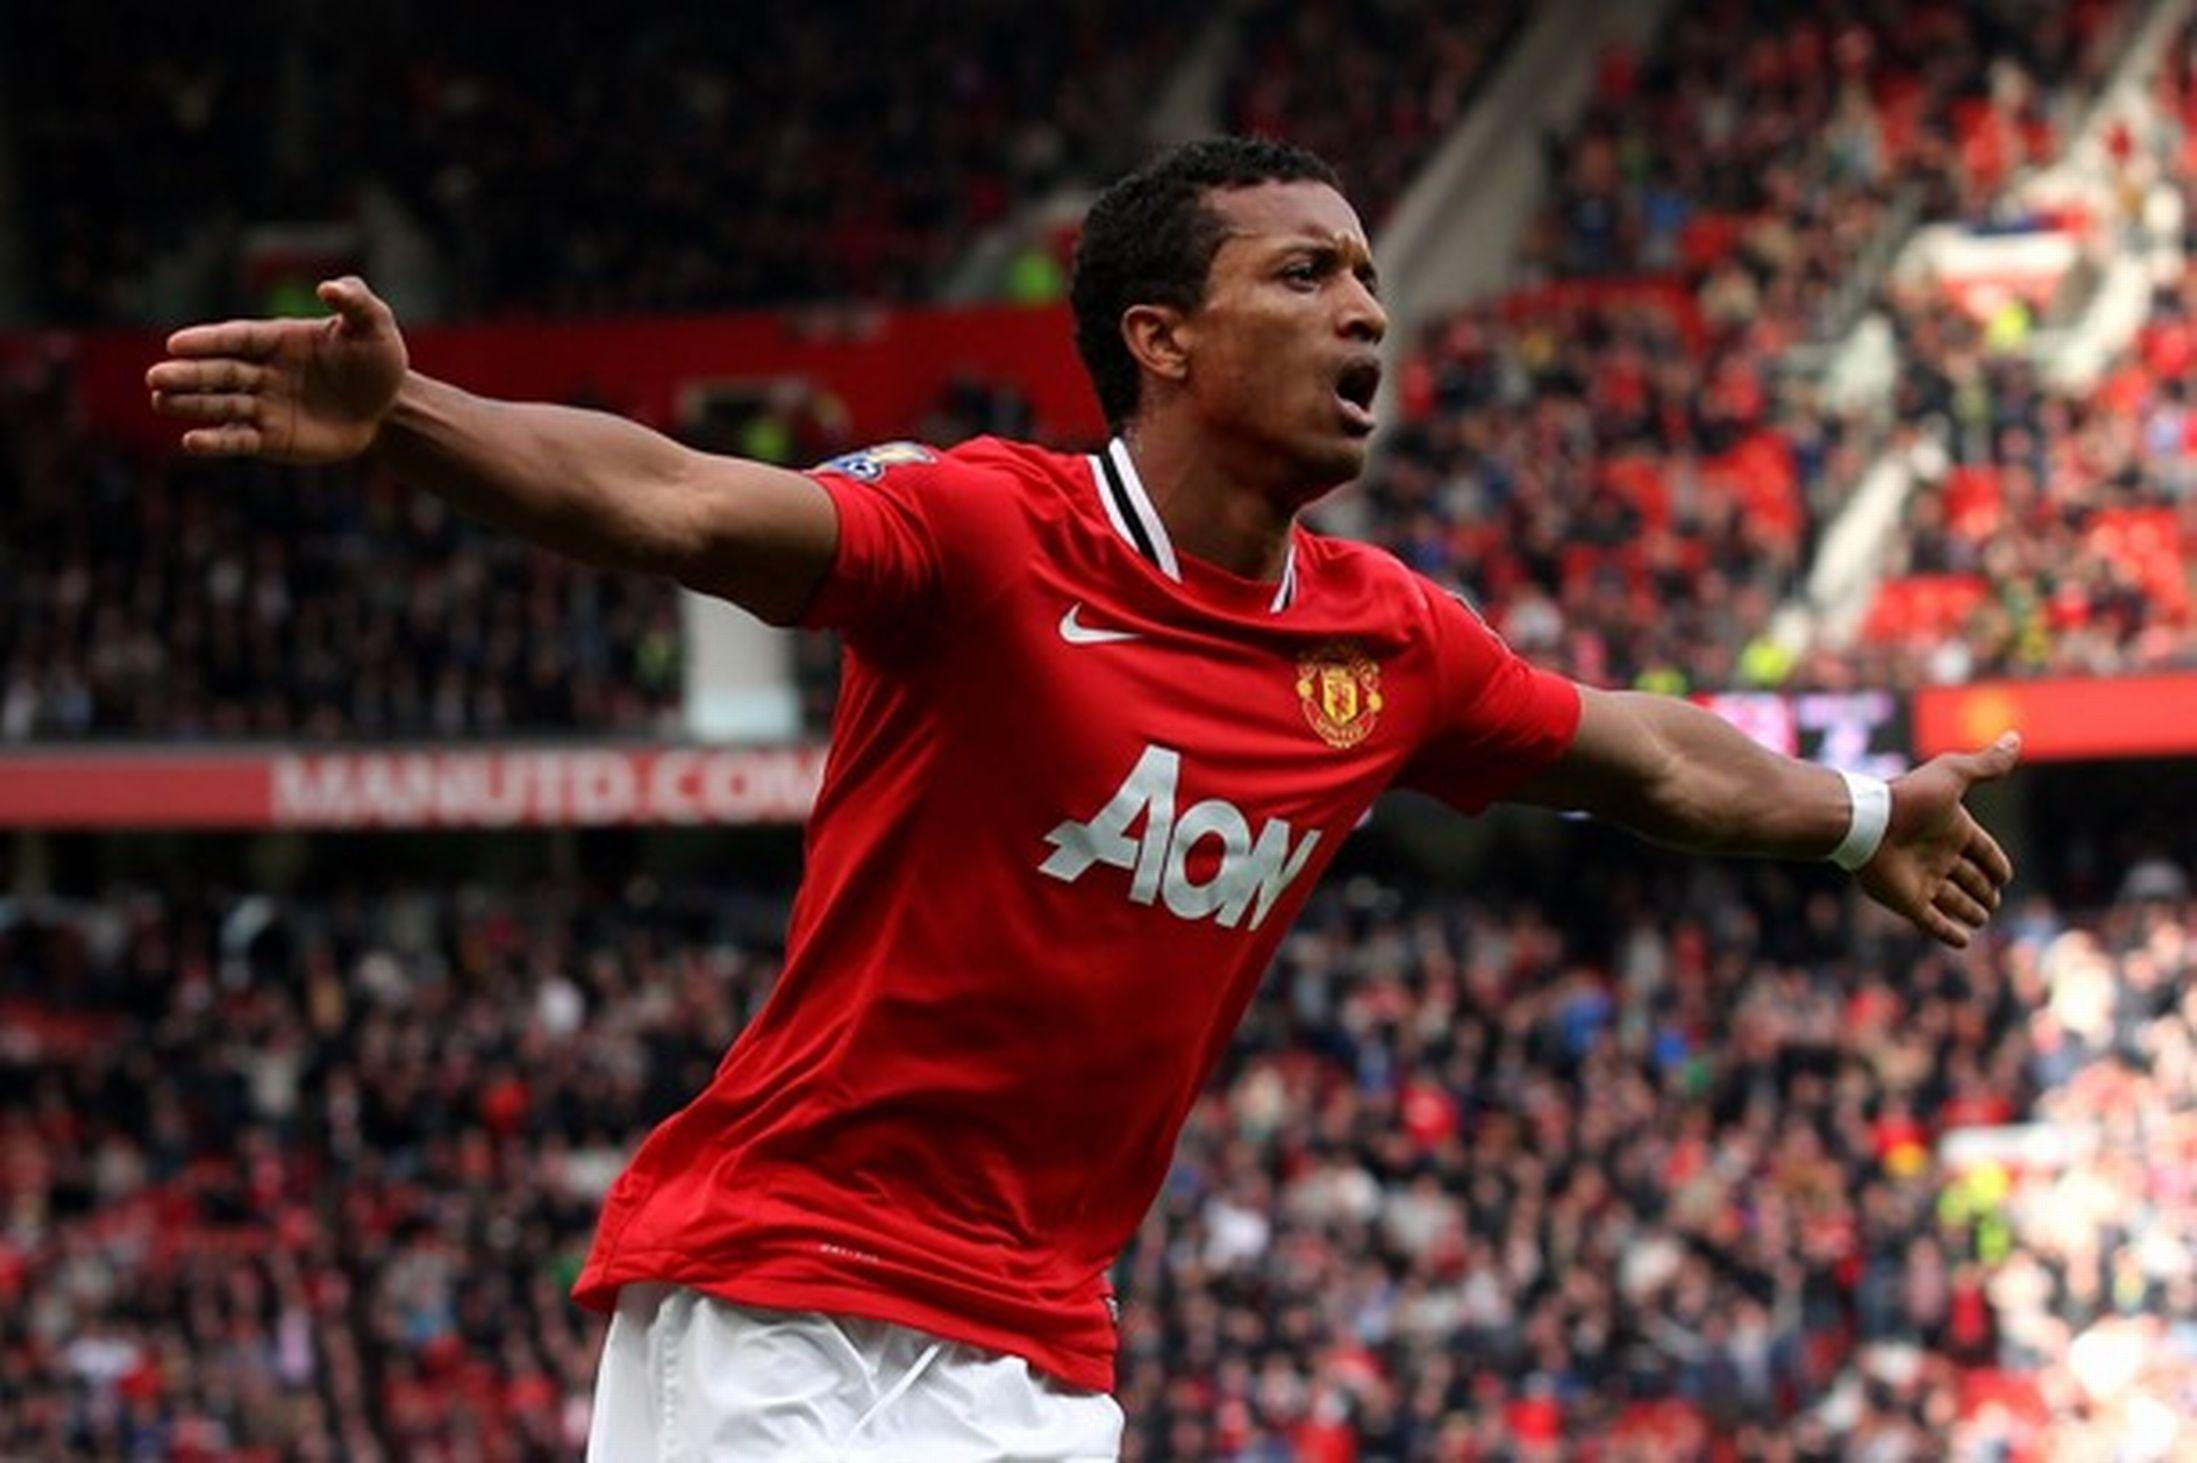 The halfback of Manchester United Luis Nani is flying over